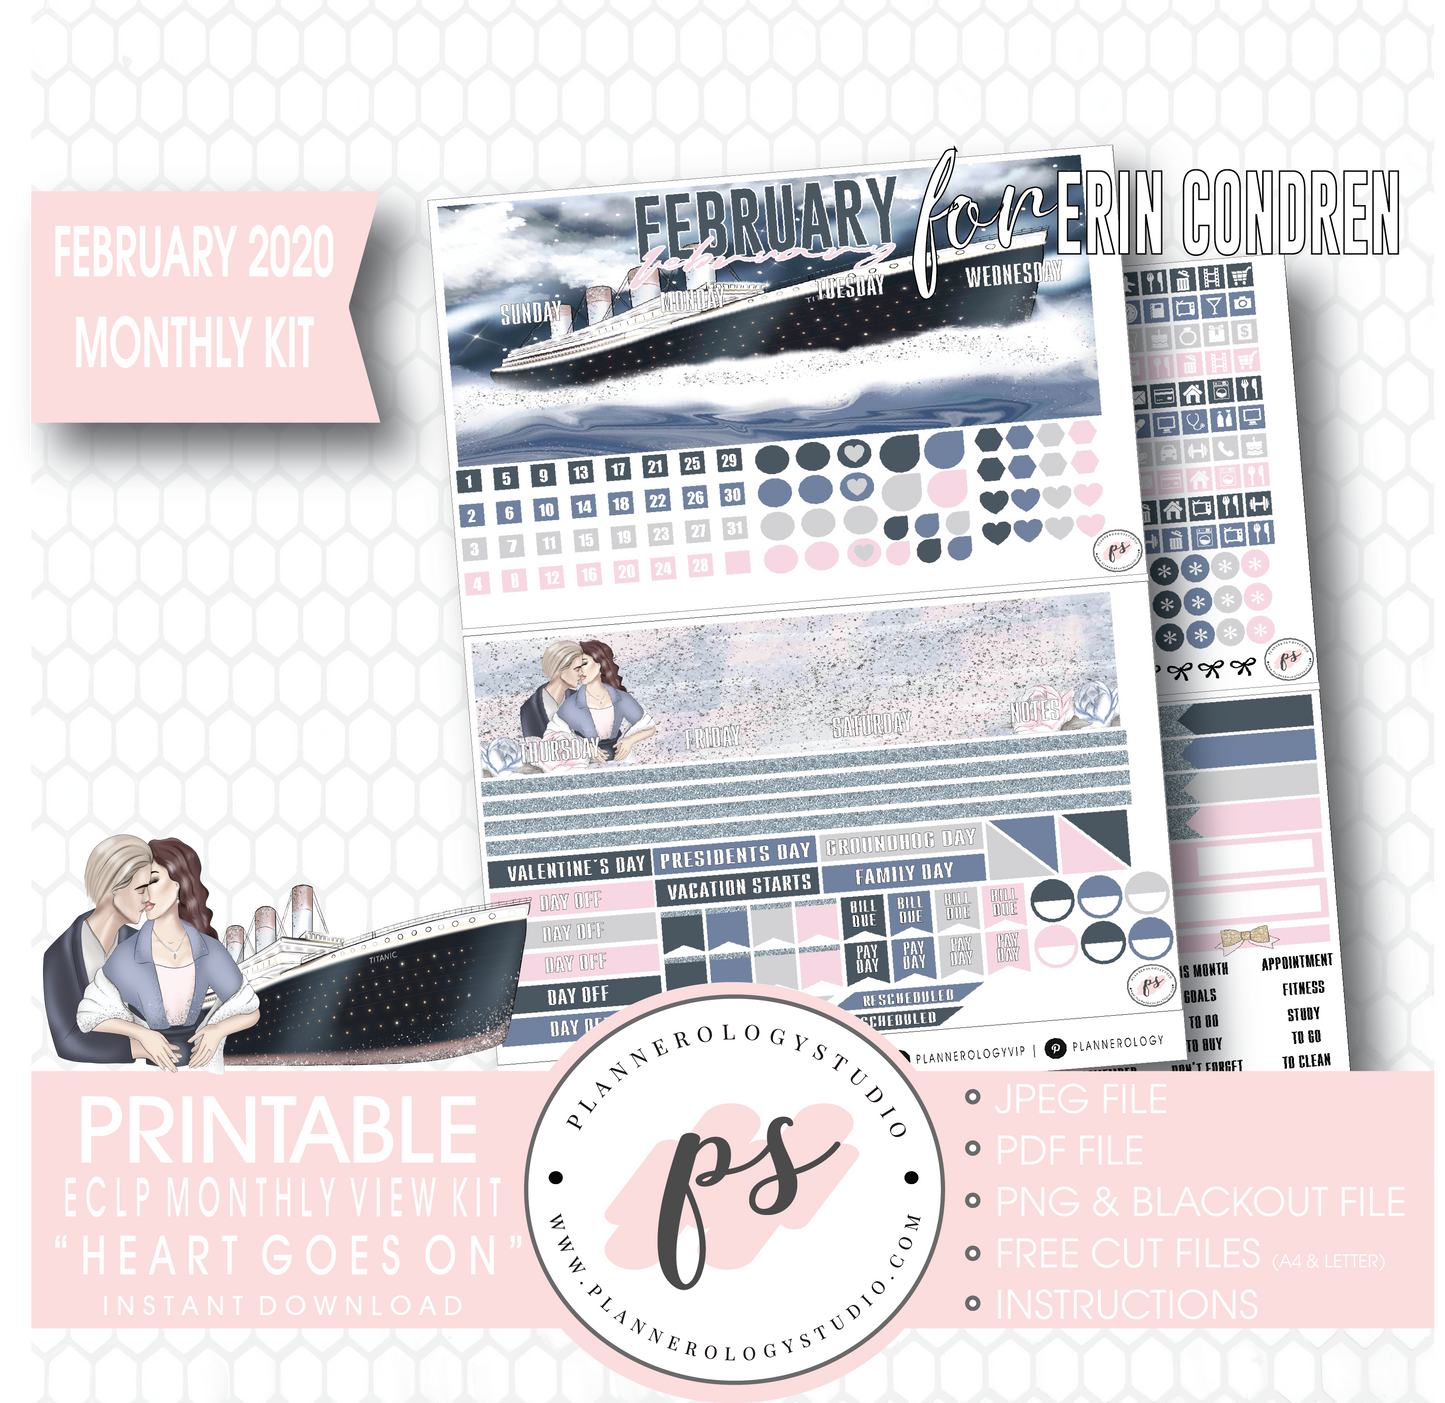 Heart Goes On (Titanic) February 2020 Monthly View Kit Digital Printable Planner Stickers (for use with Erin Condren) - Plannerologystudio